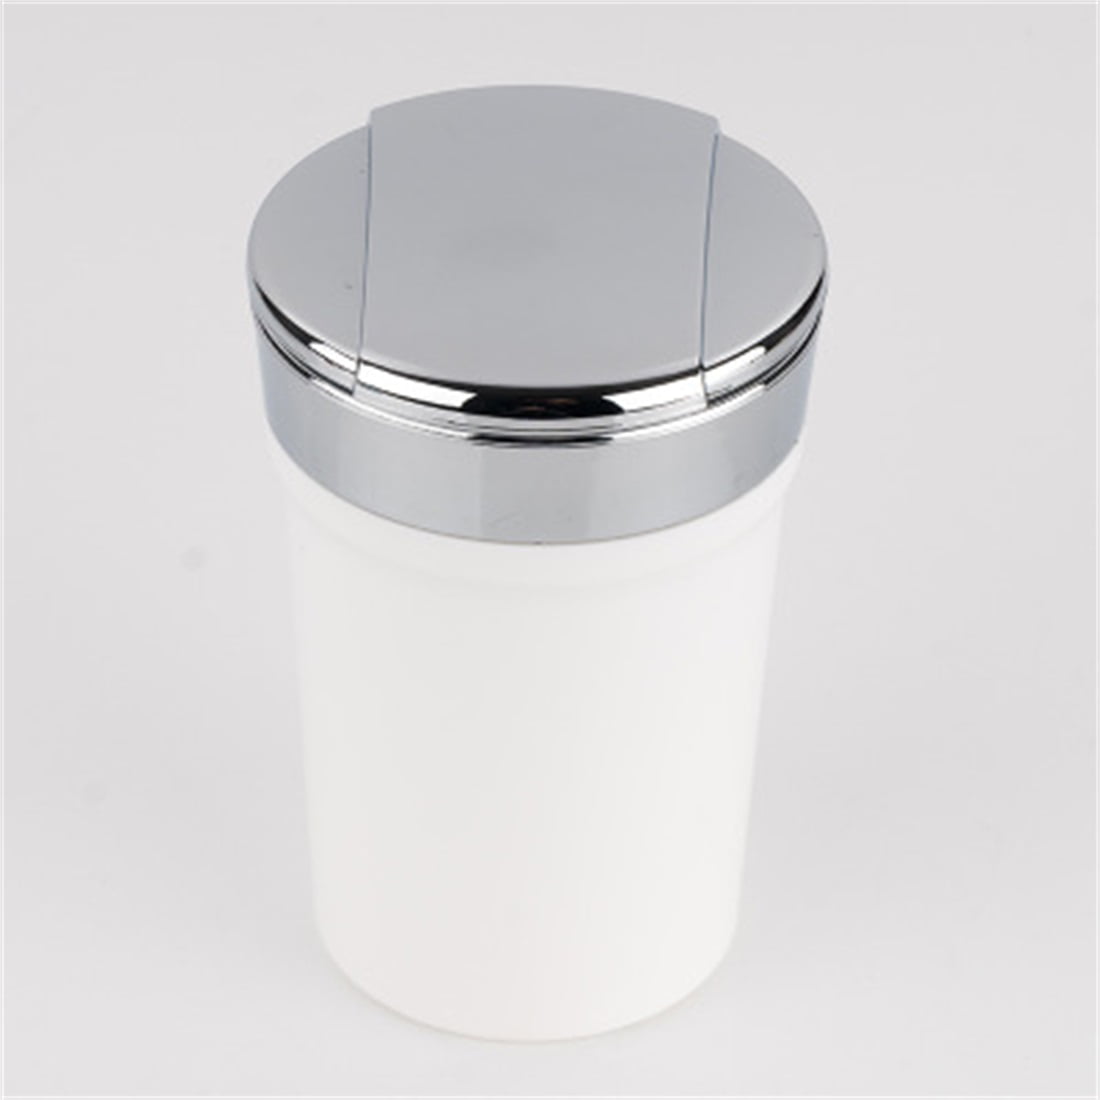 Windproof for Outdoor Travel car ashtray with lid smell proof,smokeless ashtray Ashtray with lid Detachable Coffee Cup Design Plastic Smokeless Ashtray for Car,Portable Ashtray for Car Home Use Mini Car Trash Can 